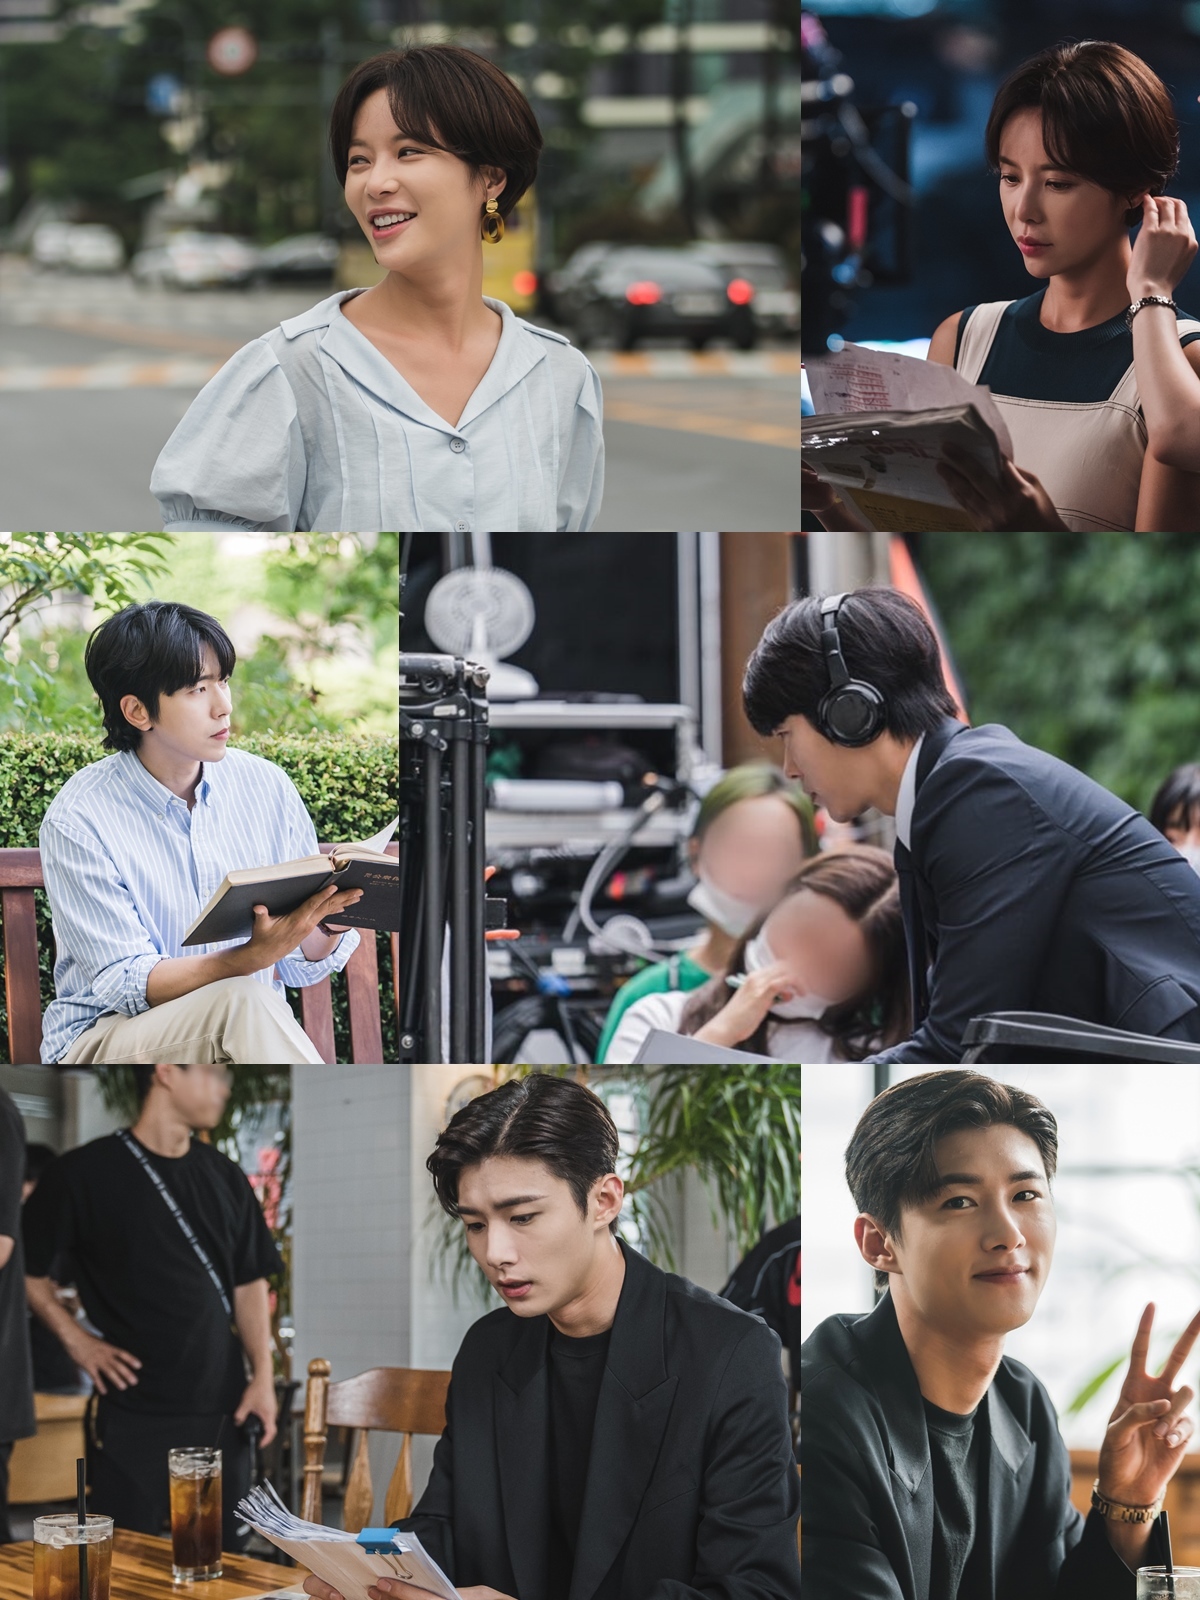 Seoul = = He is the guy Hwang Jung-eum Yoon Hyun-min, Seo Ji-hoons hot-rolled behind-the-scenes still cut was released.KBS 2TV Wall Street drama He Is He (played by Lee Eun-young/directed by Choi Yoon-seok and Lee Ho) released a behind-the-scenes still cut featuring Hwang Jung-eum, Yoon Hyun-min and Seo Ji-hoon on the 28th.In the previous broadcast, the romance between Seo Hyun-joo (Hwang Jung-eum) and Hwang Ji-woo (Yoon Hyun-min), which finally followed after twists and turns, stimulated interest.However, expectations are gathering until the final meeting where the love of the two people who showed different positions about marriage will flow in.The behind-the-scenes cut includes various moments containing 1 inch outside the Camera of Hwang Jung-eum Yoon Hyun-min and Seo Ji-hoon.First, Hwang Jung-eum reveals the atmosphere of the filming scene with a smile that resembles the character Seo Hyun-joo in the play.In addition, I can get a glimpse of the passion for acting seriously and the affection for the work from the meticulous Hwang Jung-eum who reads the tattered script repeatedly.Yoon Hyun-mins past life behind-the-scenes cut is also revealed and attracts attention.Yoon Hyun-min, who is staring at the air with a book in one hand, is giving off the intellectual charm of a senior school that anyone would have liked once.He also wears a headset and seriously looks at the screen, adding to his professional charm.Seo Ji-hoon is concentrating his attention in front of the Camera. When the Camera is turned on, he is immersed in the role and is attracted to the extraordinary enthusiasm that shows a 200% synchro rate with Park Do-gum.Seo Ji-hoons anti-war charm, which draws a V toward the Camera and makes a playful look, ascends the clown of viewers.As such, the actors in The Guy Is the Guy are deeply immersed in acting to create a perfect character, and they are adding vitality to the filming without losing their joy.With only two times left to the end, they raise expectations about how they will fix the channel of the house theater until the end.